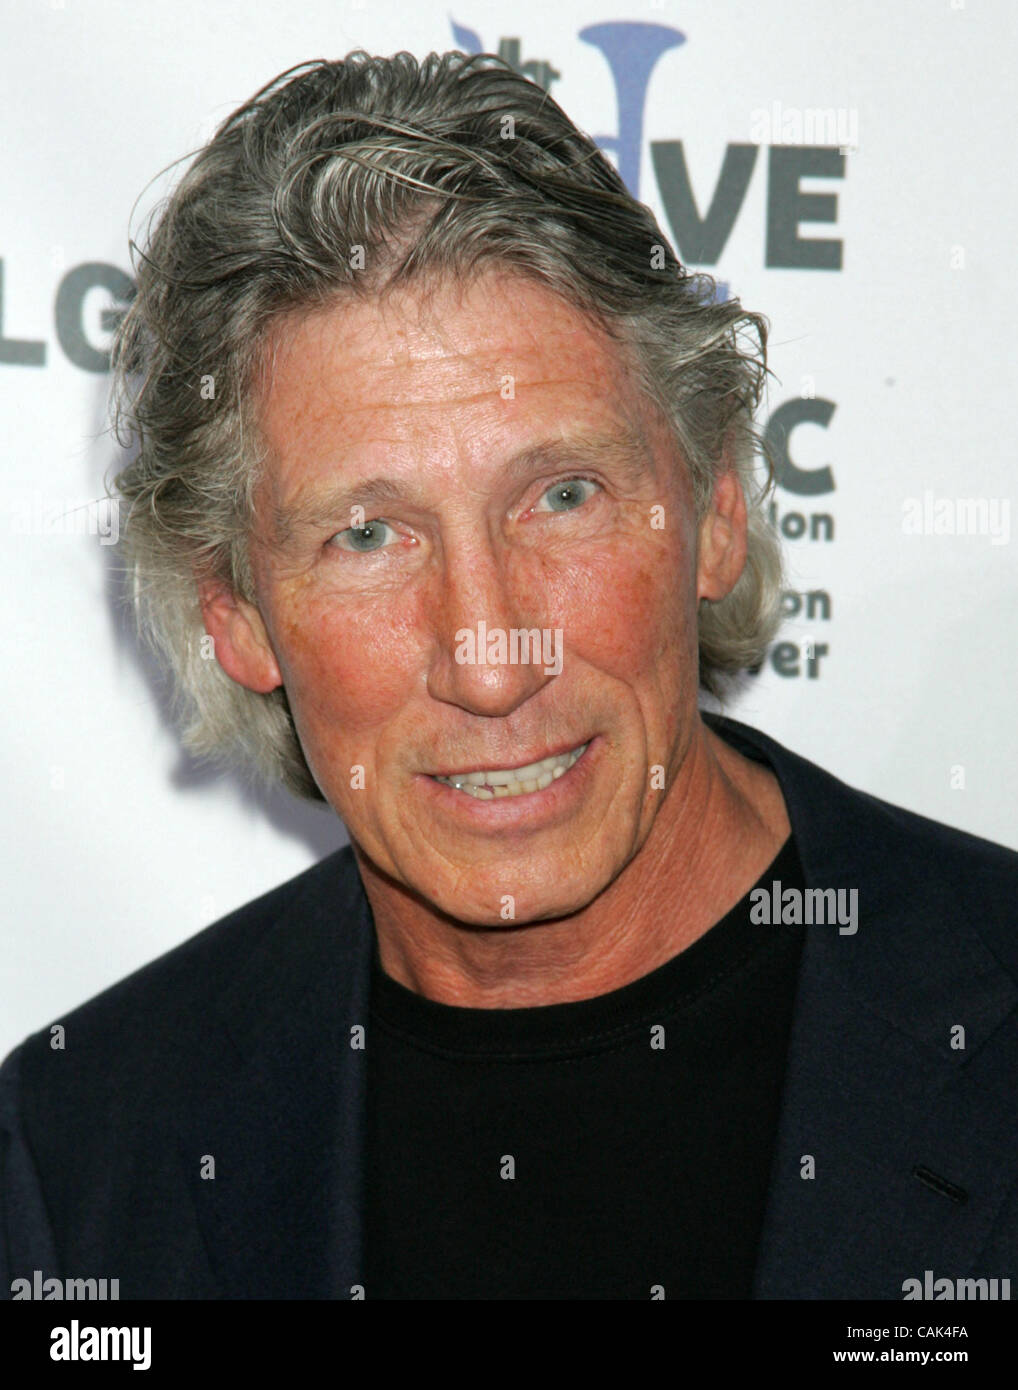 Sep 20, 2007 - New York, NY, USA - Singer ROGER WATERS at the arrivals for the VH1 Save The Music Foundation's 10th Anniversary Gala held at Lincoln Center. (Credit Image: © Nancy Kaszerman/ZUMA Press) Stock Photo